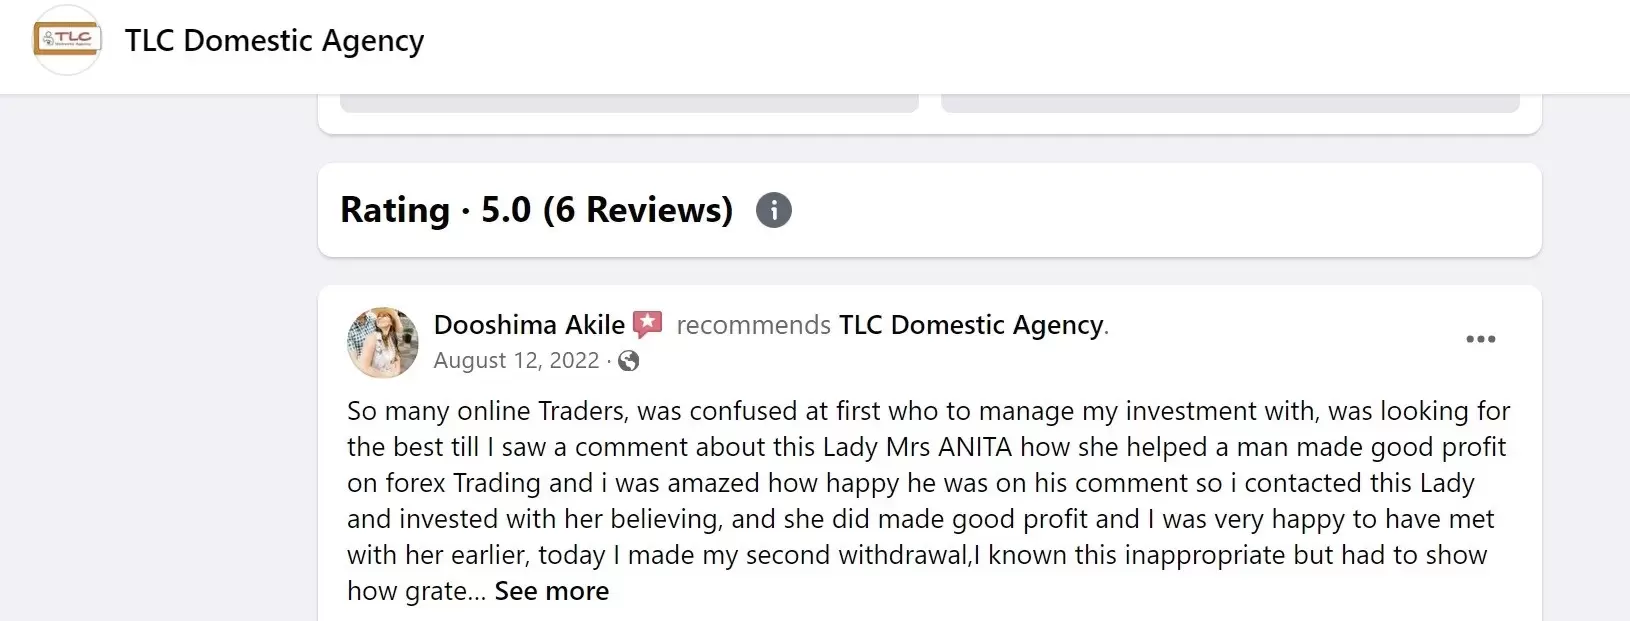 positive review of the TLC Domestic Agency